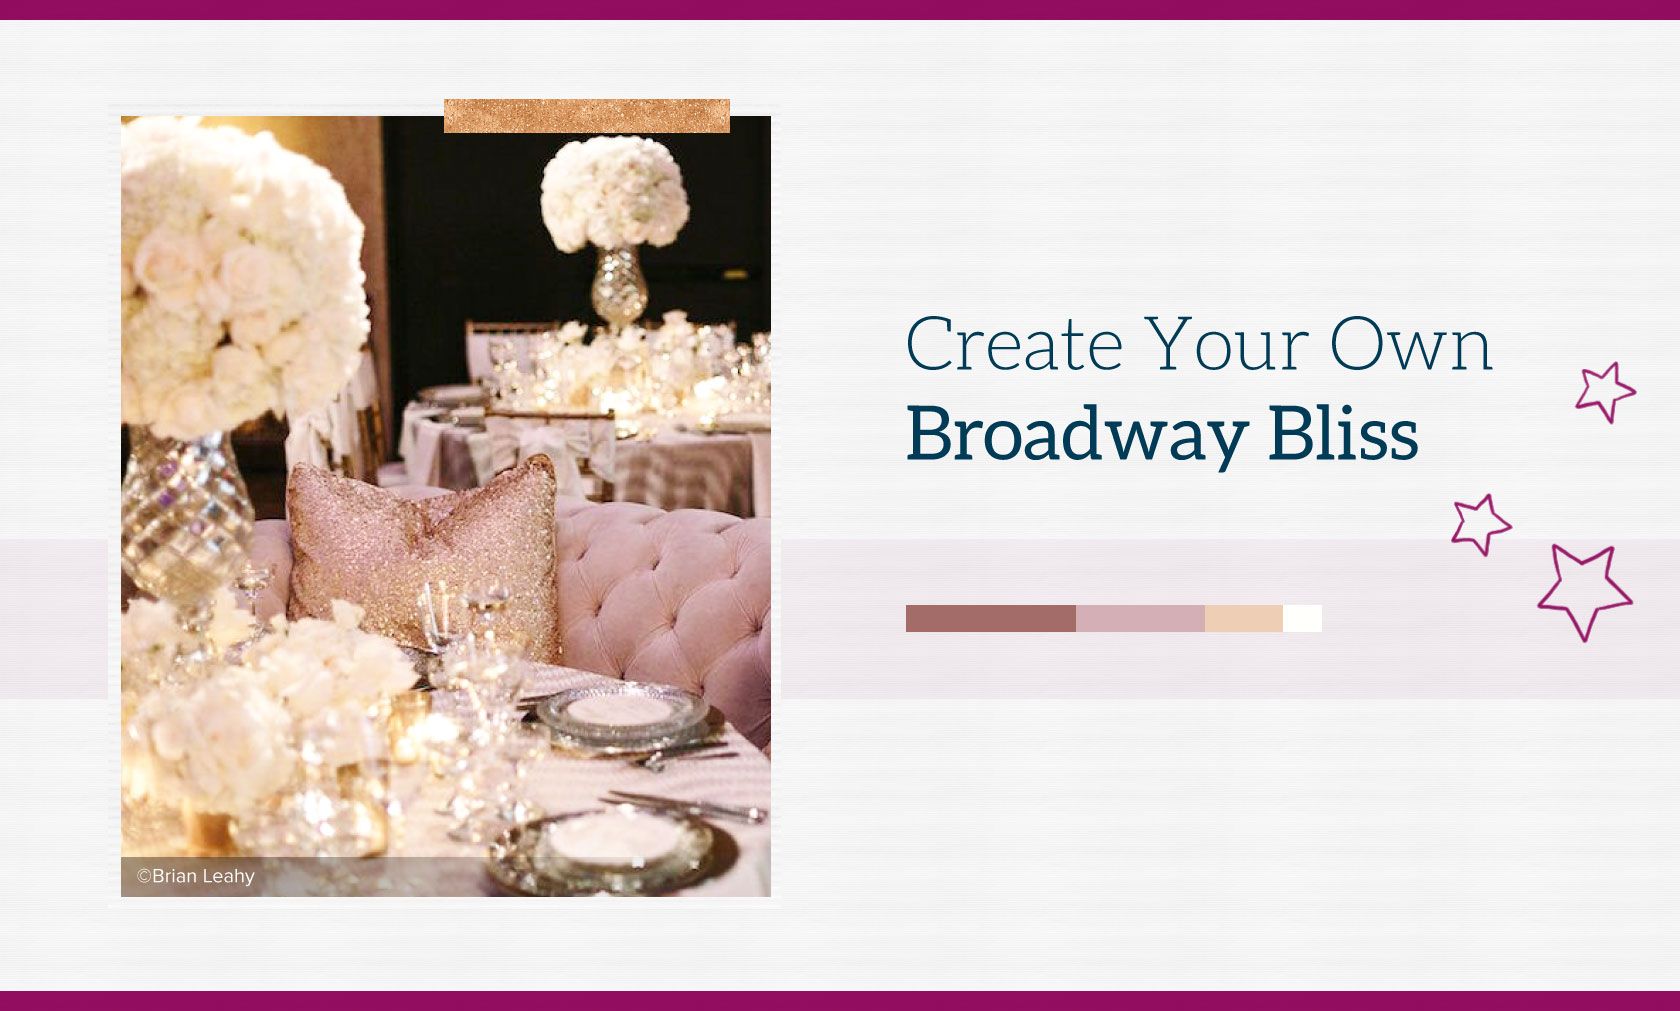 Create Your Own Broadway Bliss